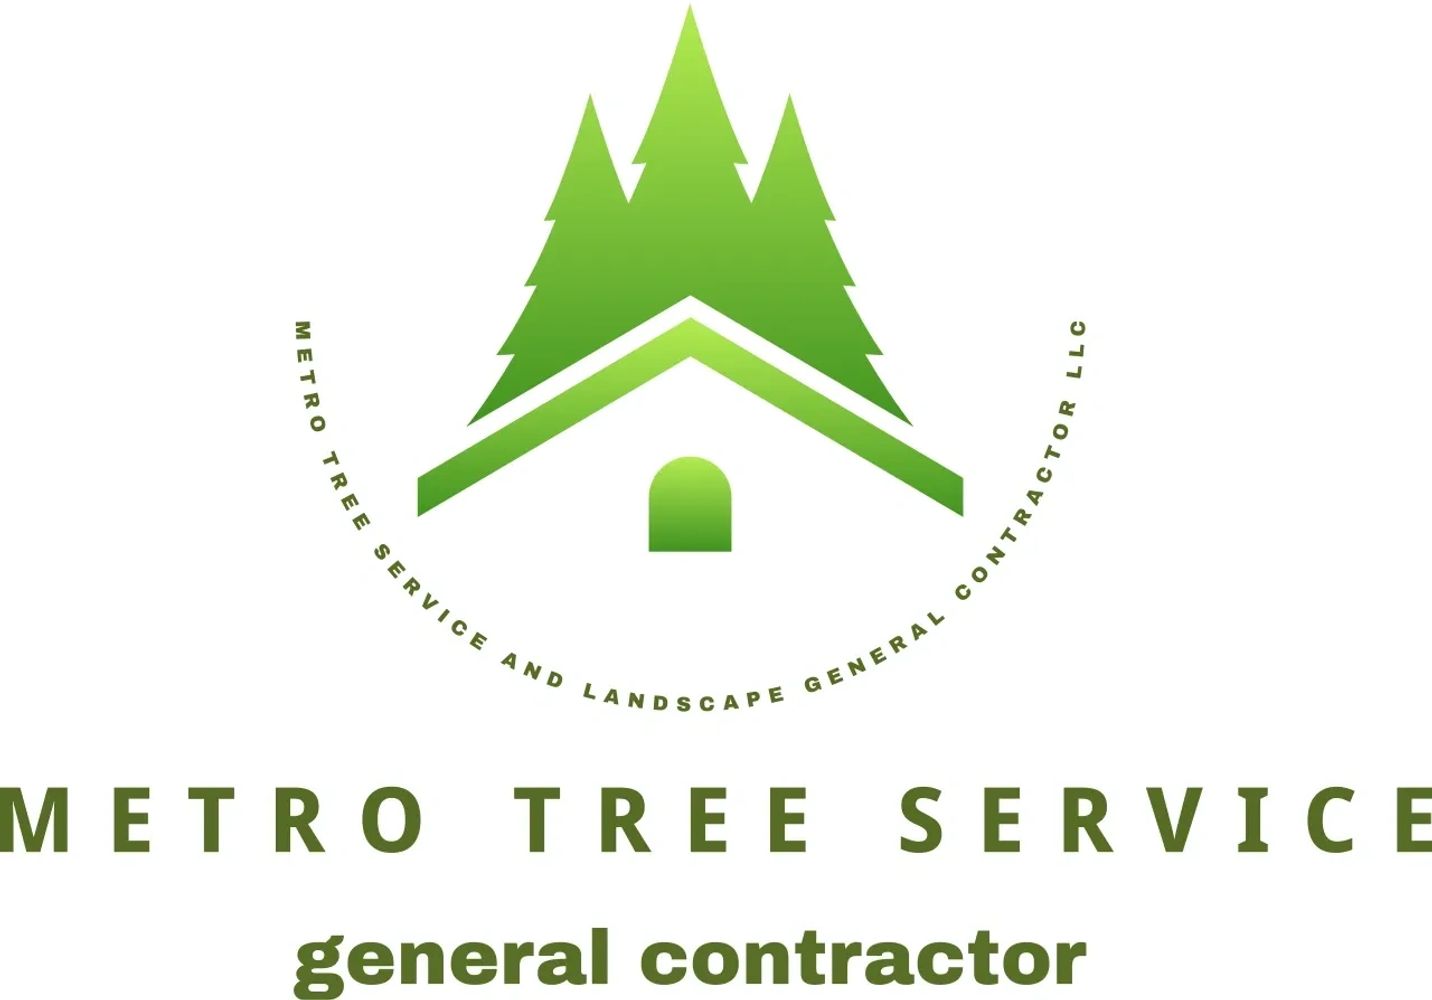 Logo image with house and trees
Metro Tree Service & Landscape General Contractor LLC 